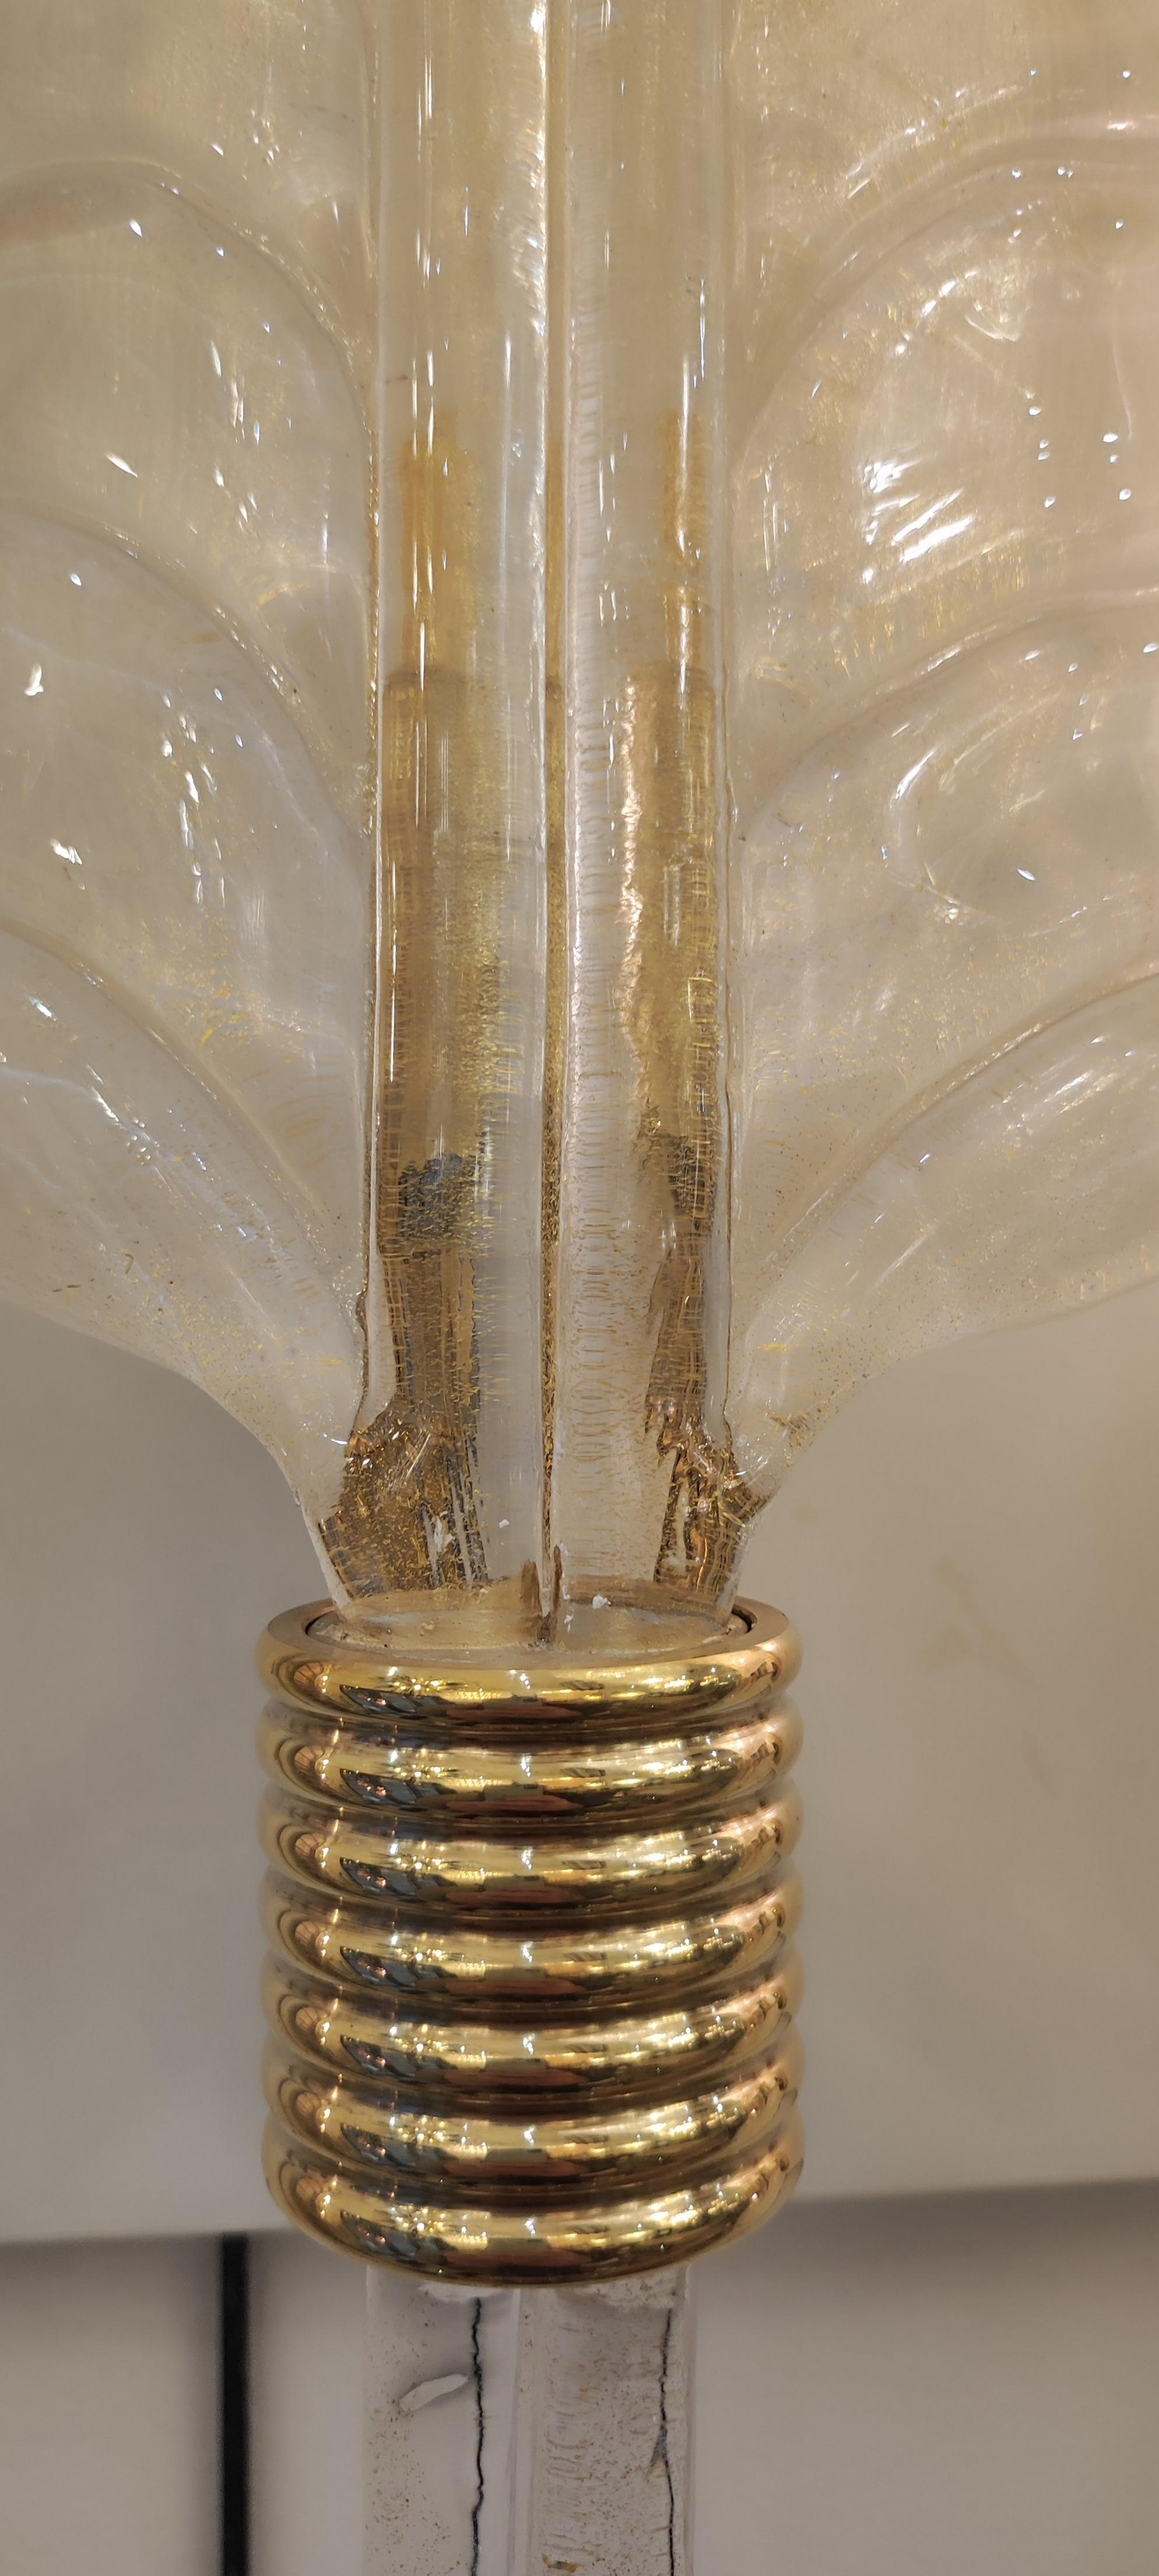 Pair of Murano glass sconces, with inclusion of gold glitter, attributed to  Barovier.
One bulb E27 , wired for Europe or USA ( compatible E26 Us standard)